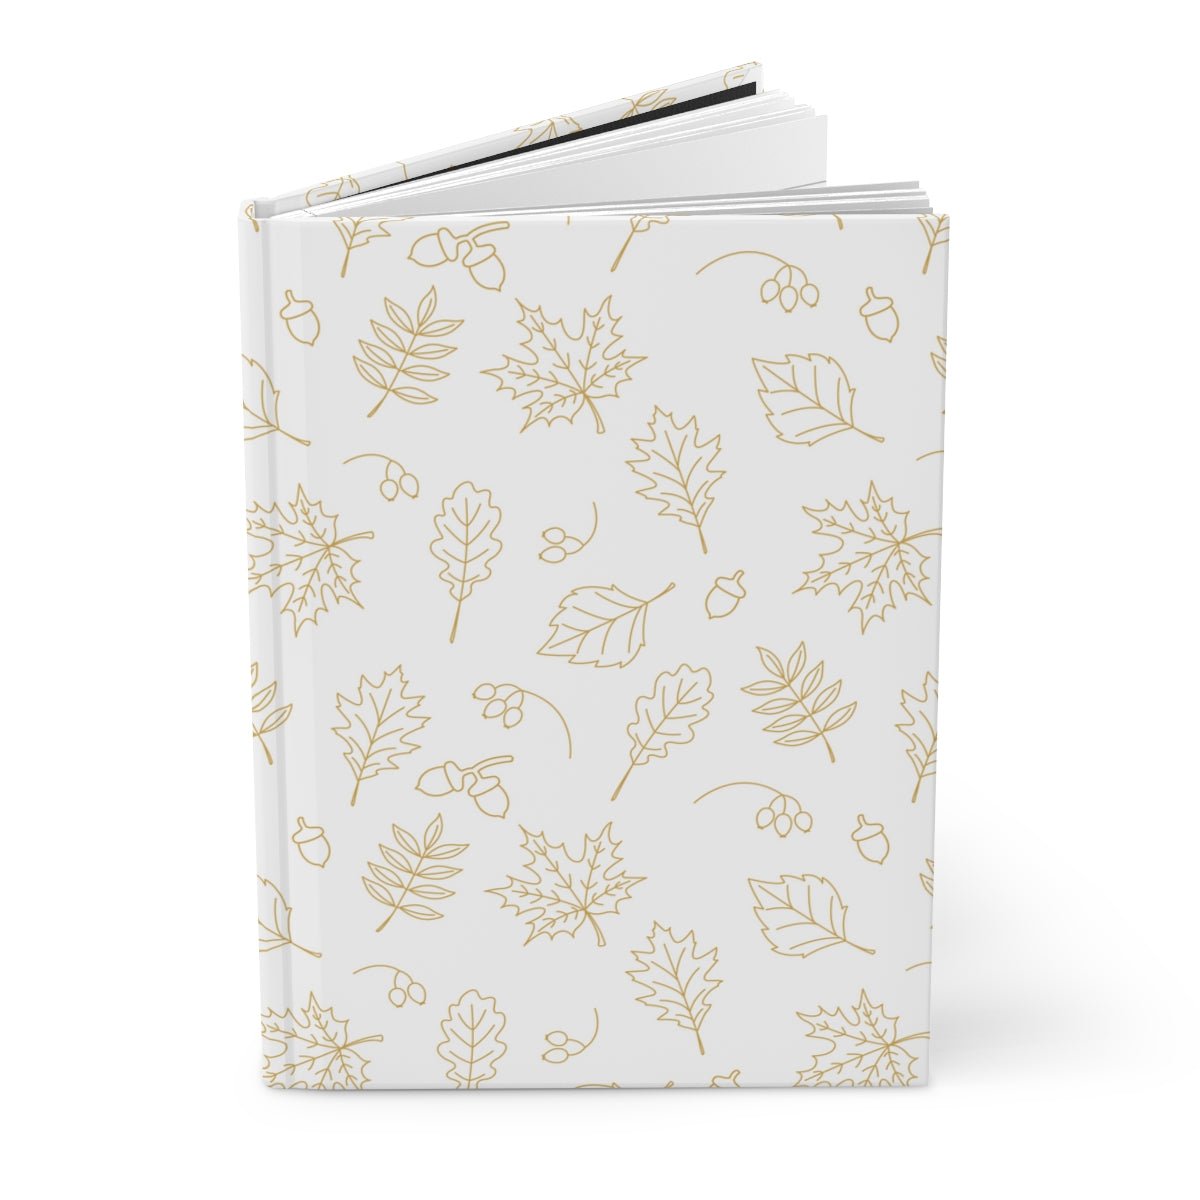 Acorns and Leaves Hardcover Journal Matte - Puffin Lime